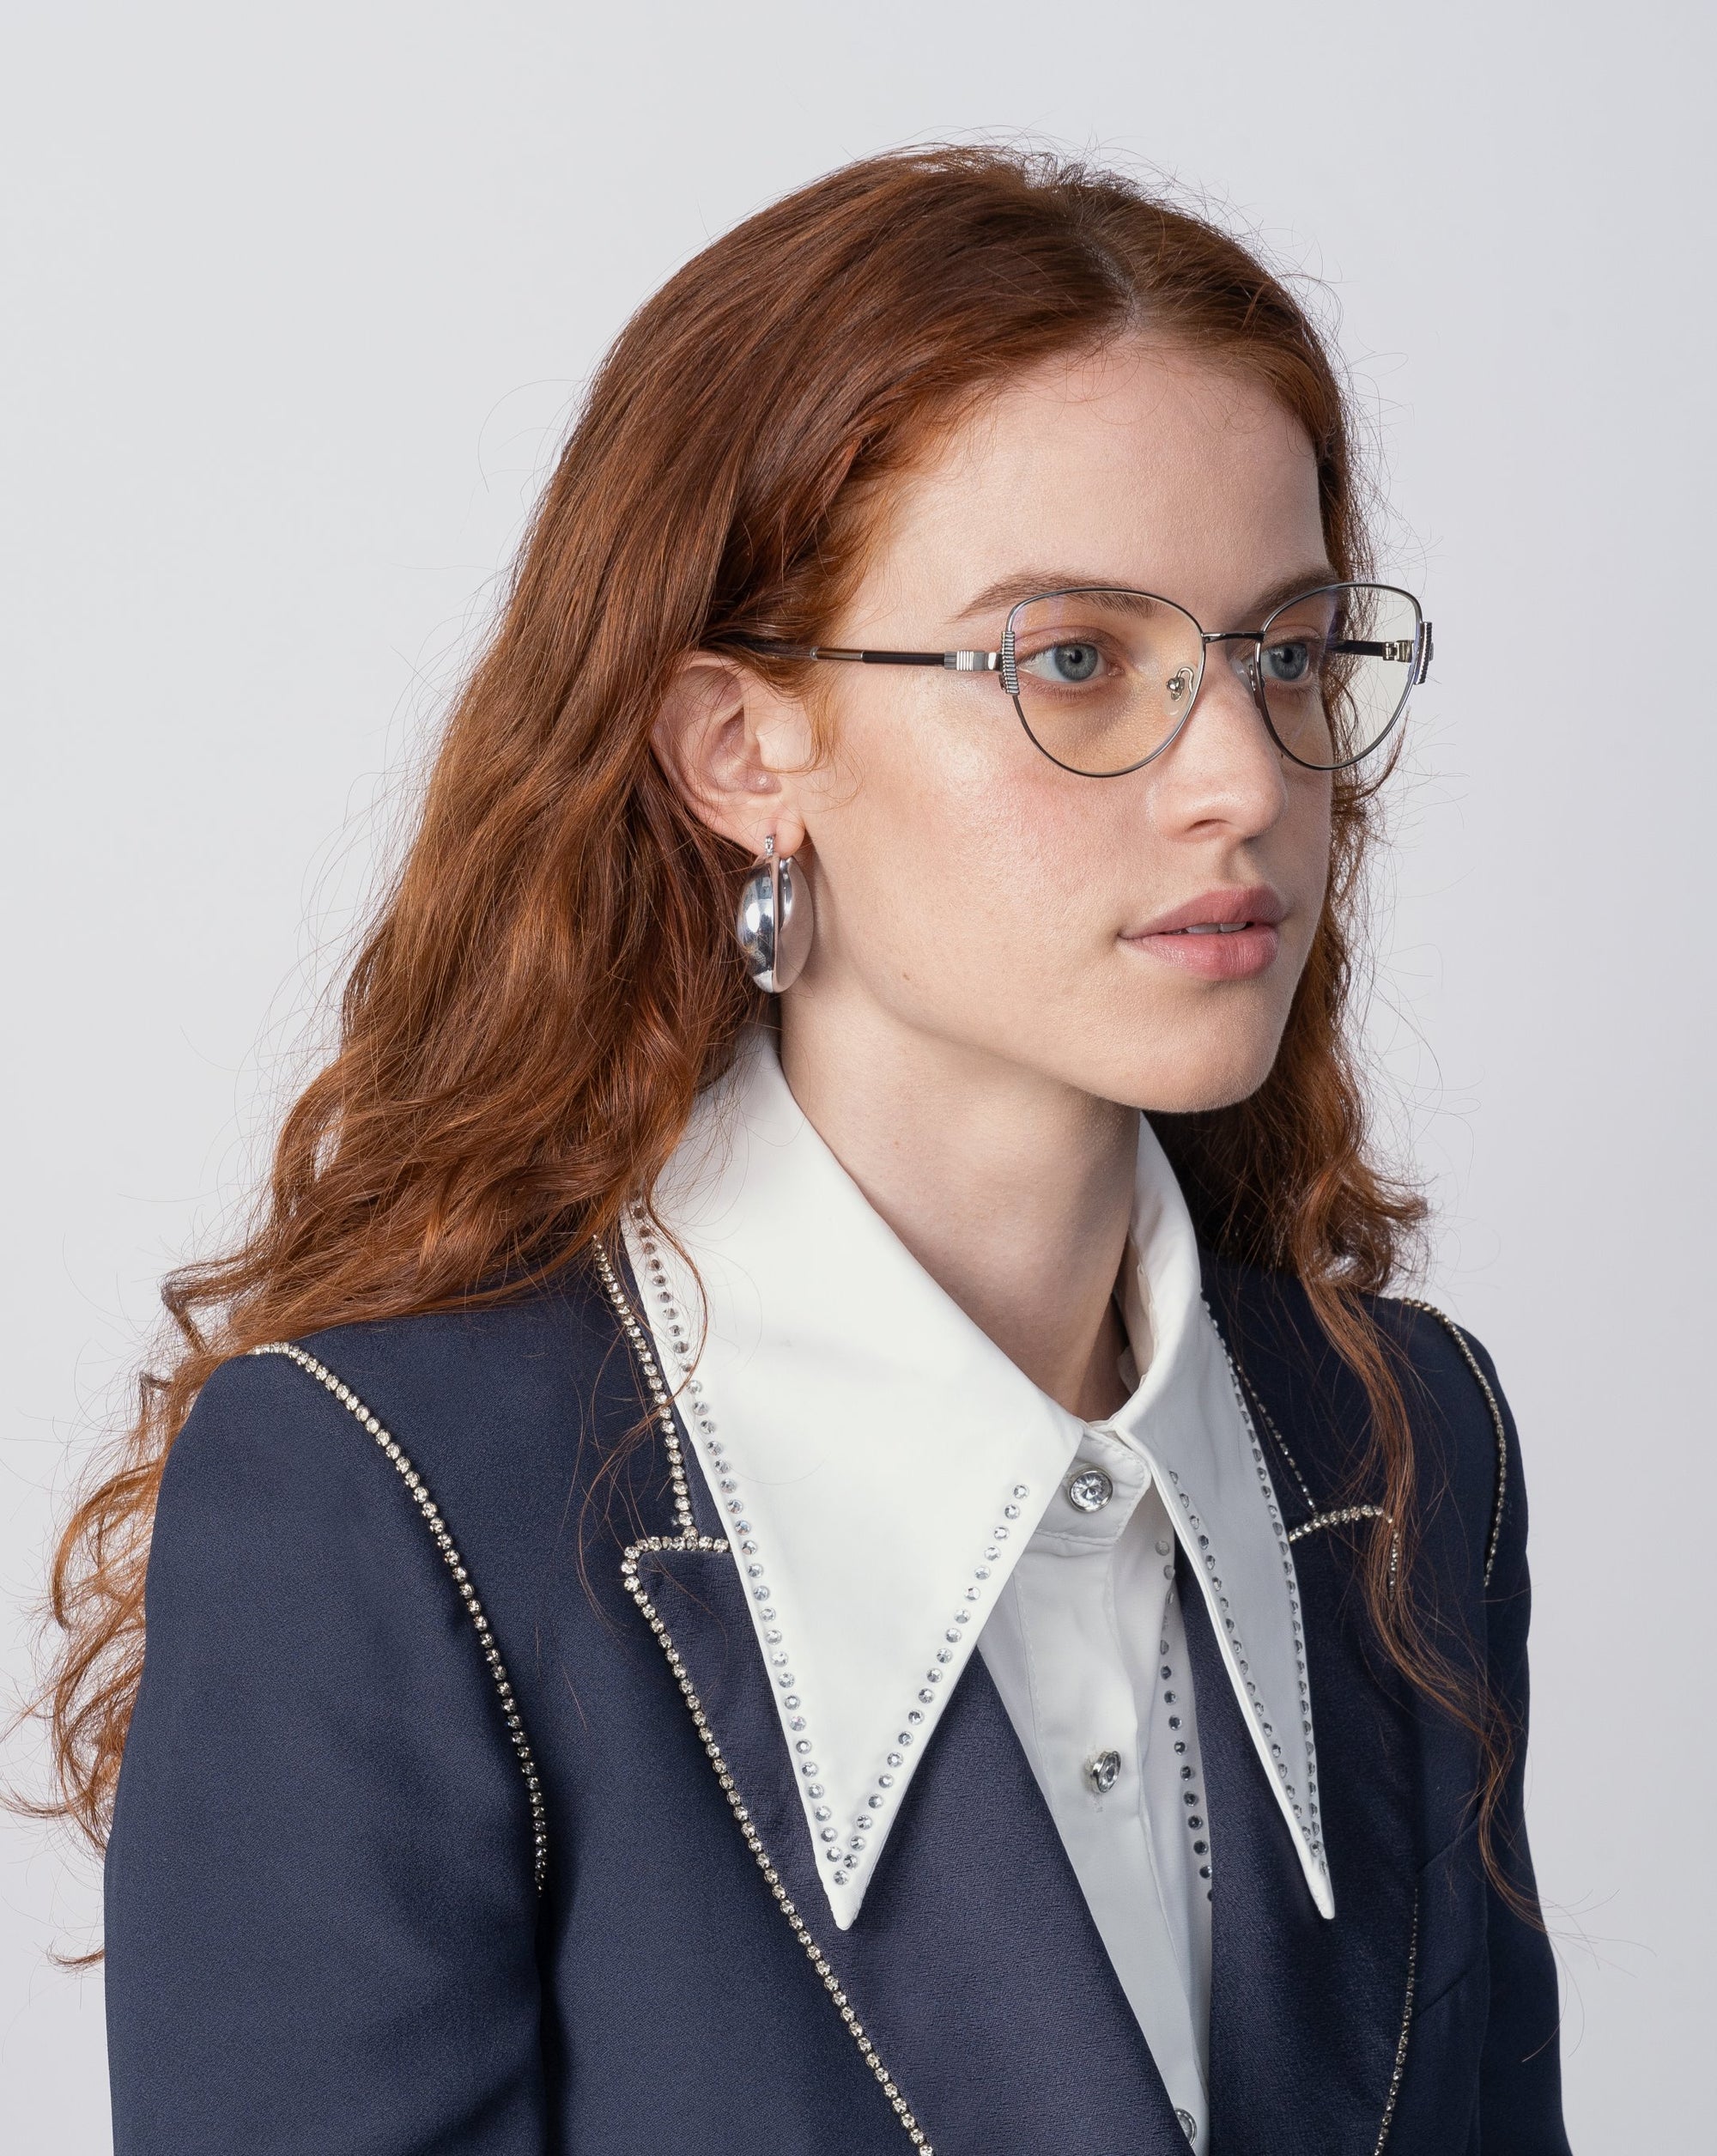 A person with long red hair and glasses with For Art&#39;s Sake® Dante jade stone nose pads is pictured against a plain background. They are wearing a dark blazer with white studs, a white shirt featuring a large collar, and silver hoop earrings.